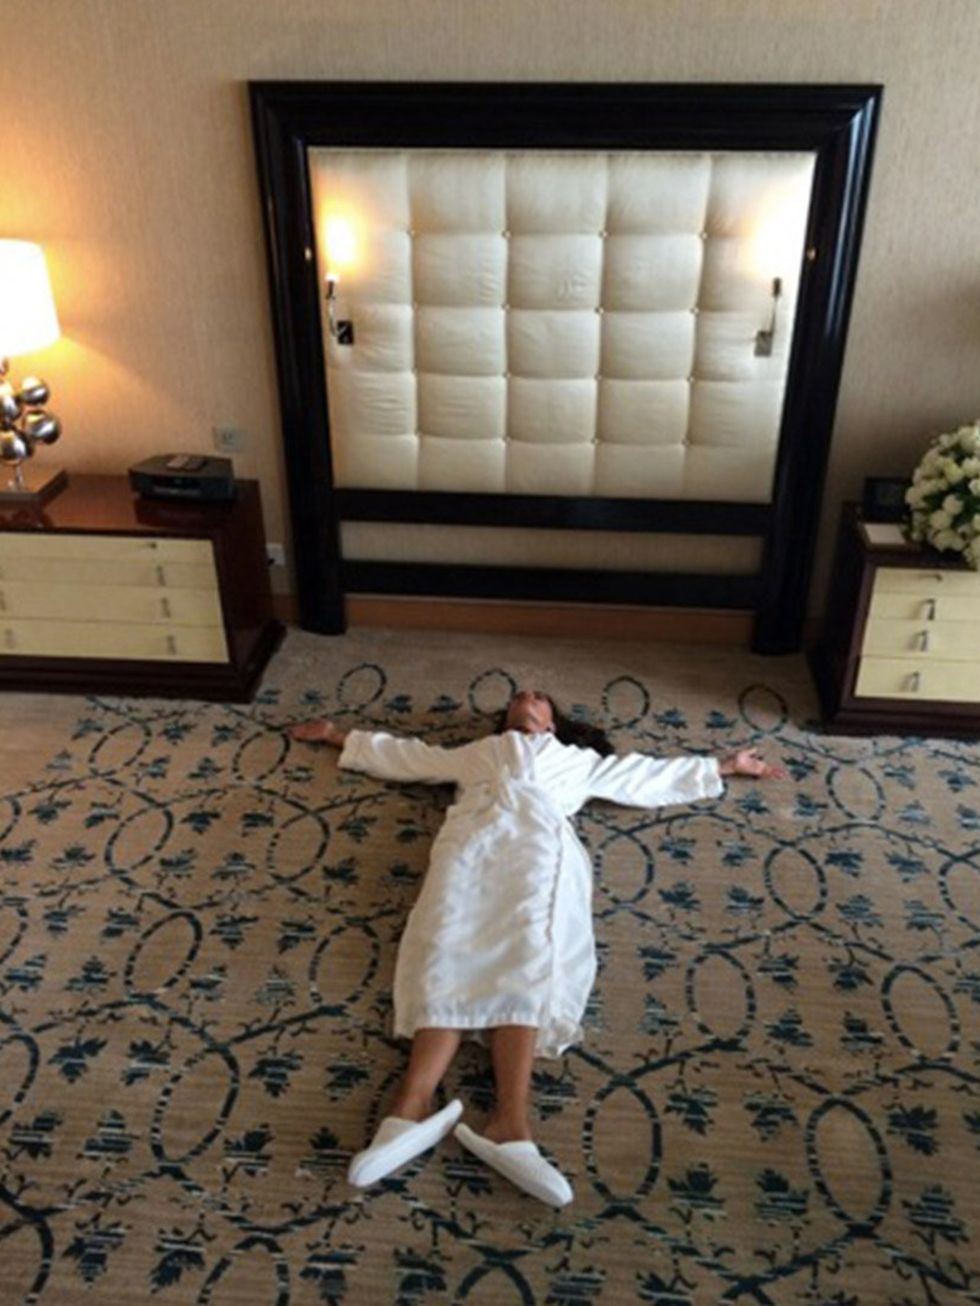 <p>'My bed is really uncomfortable x vb #fightthefrizz #VBTour'</p>